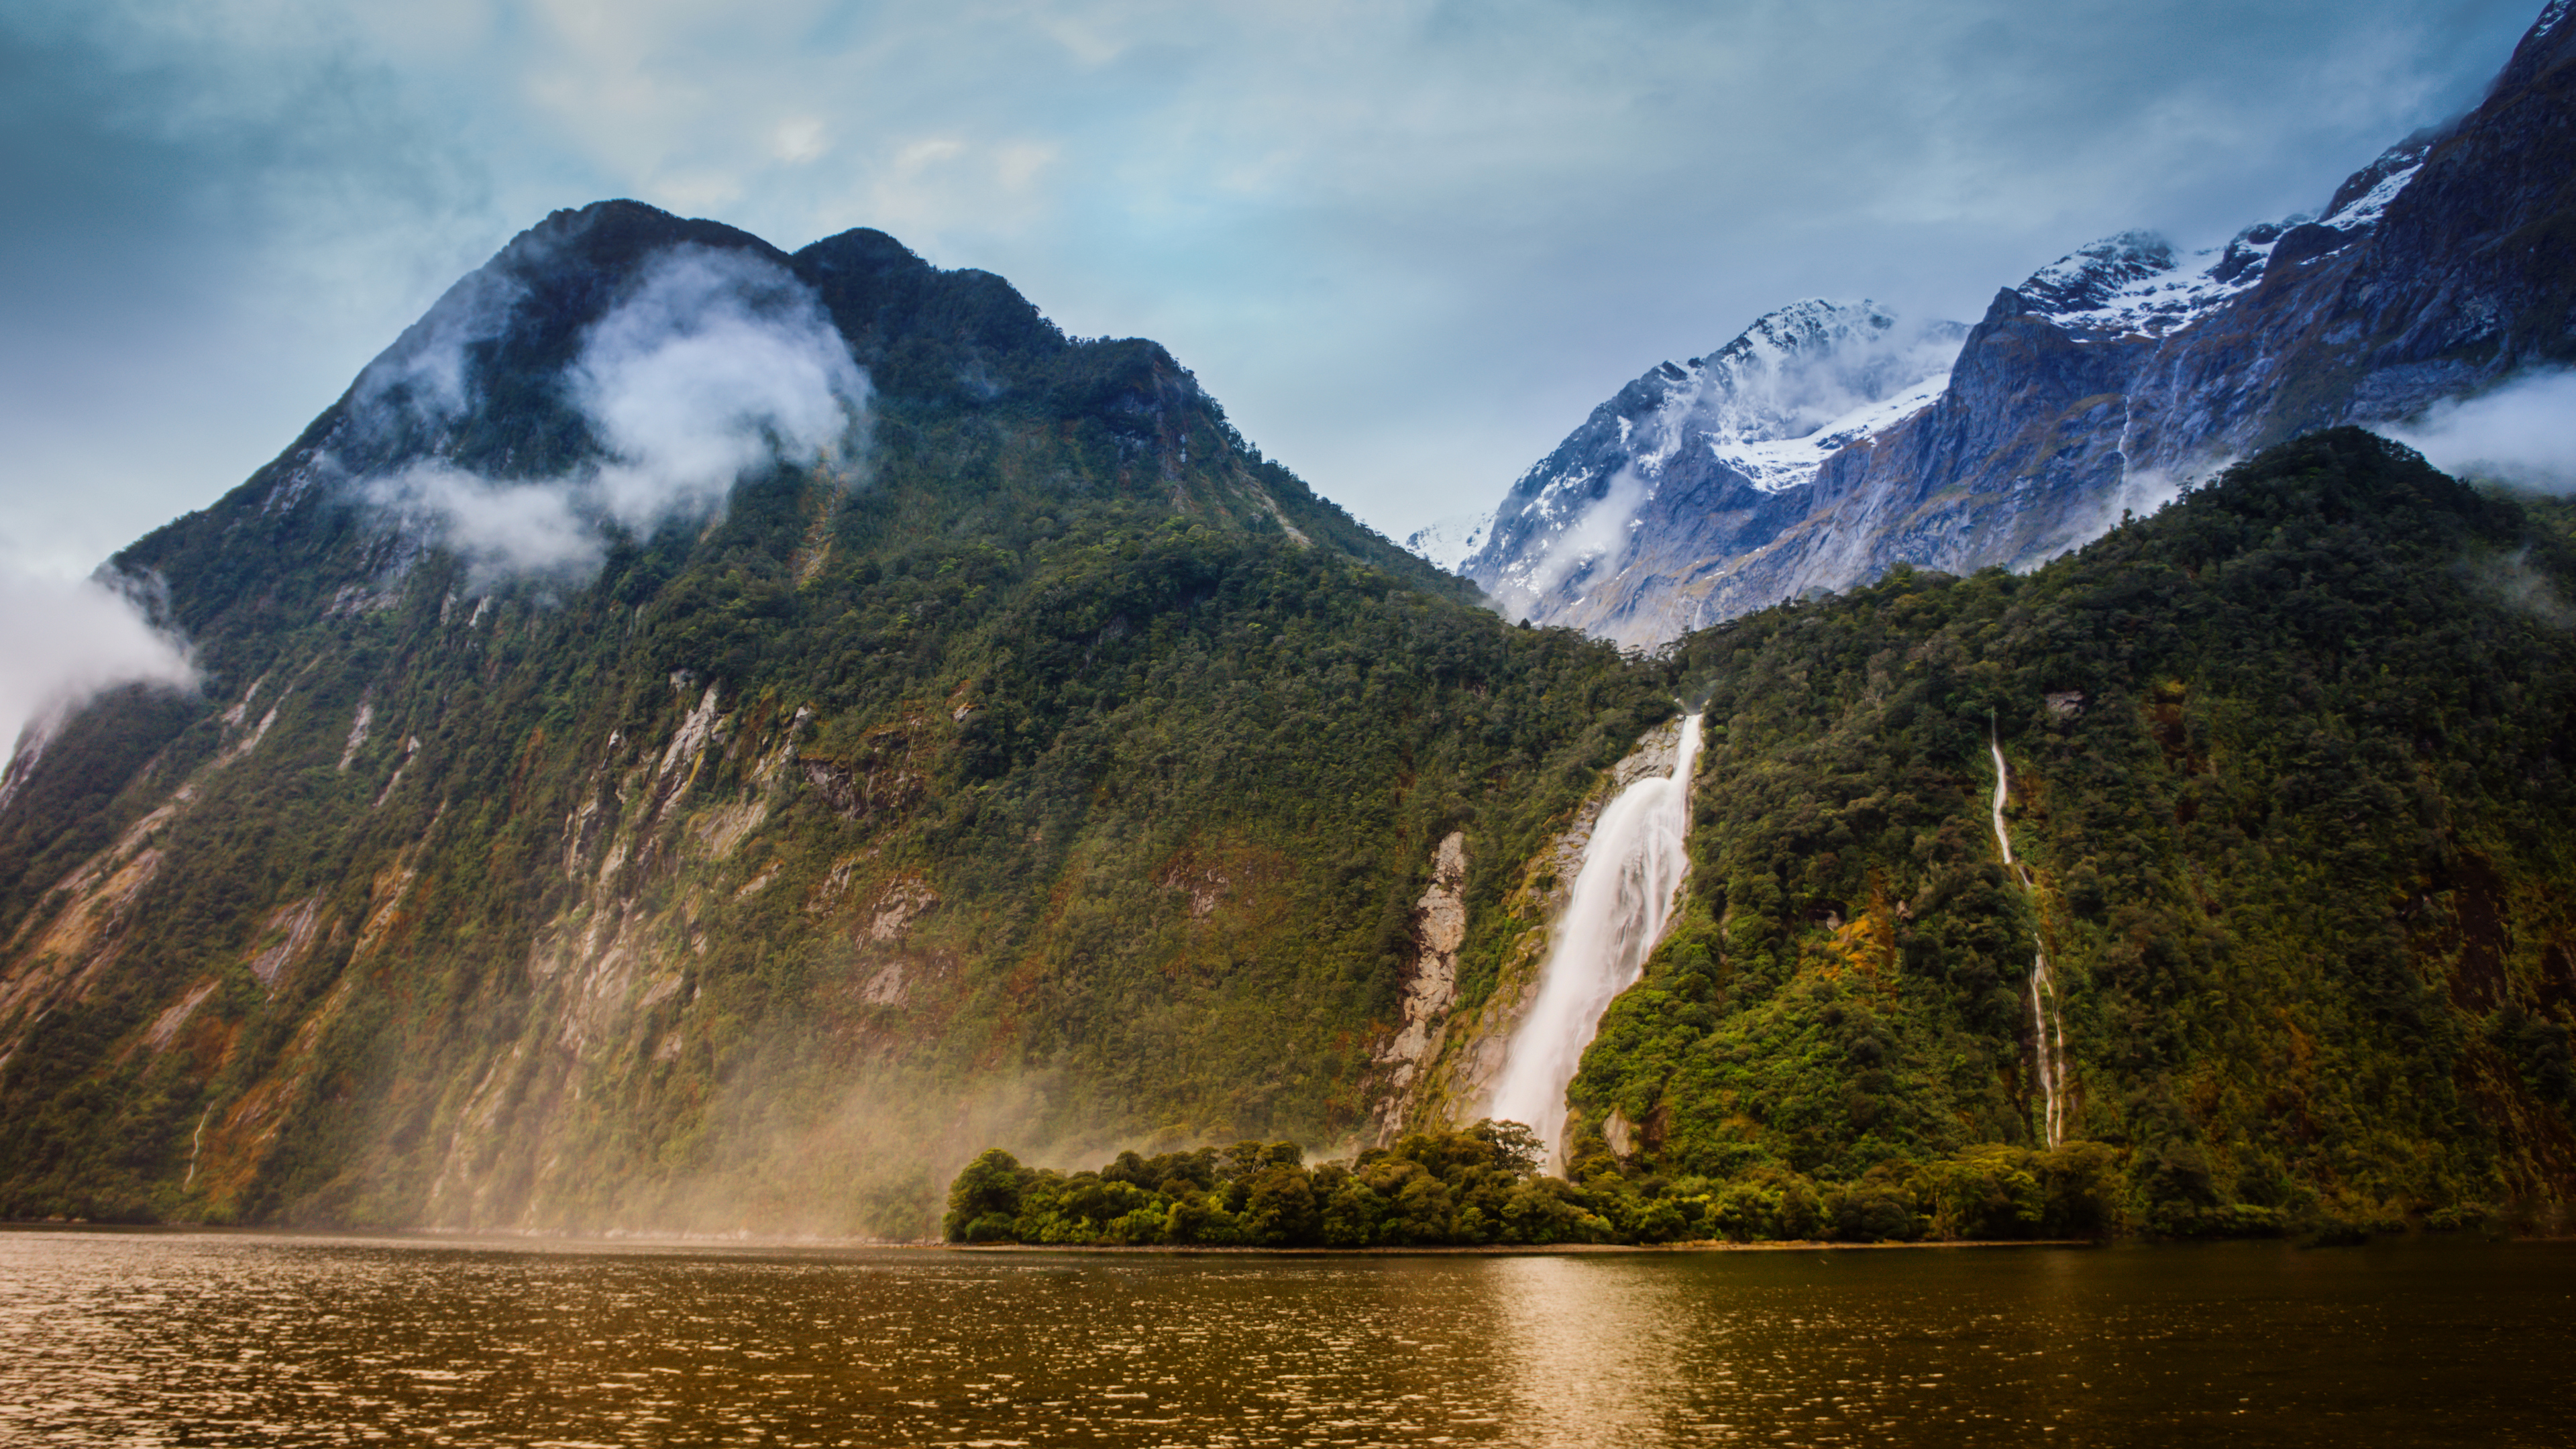 General 3840x2160 Trey Ratcliff photography landscape 4K New Zealand nature water mountains snow